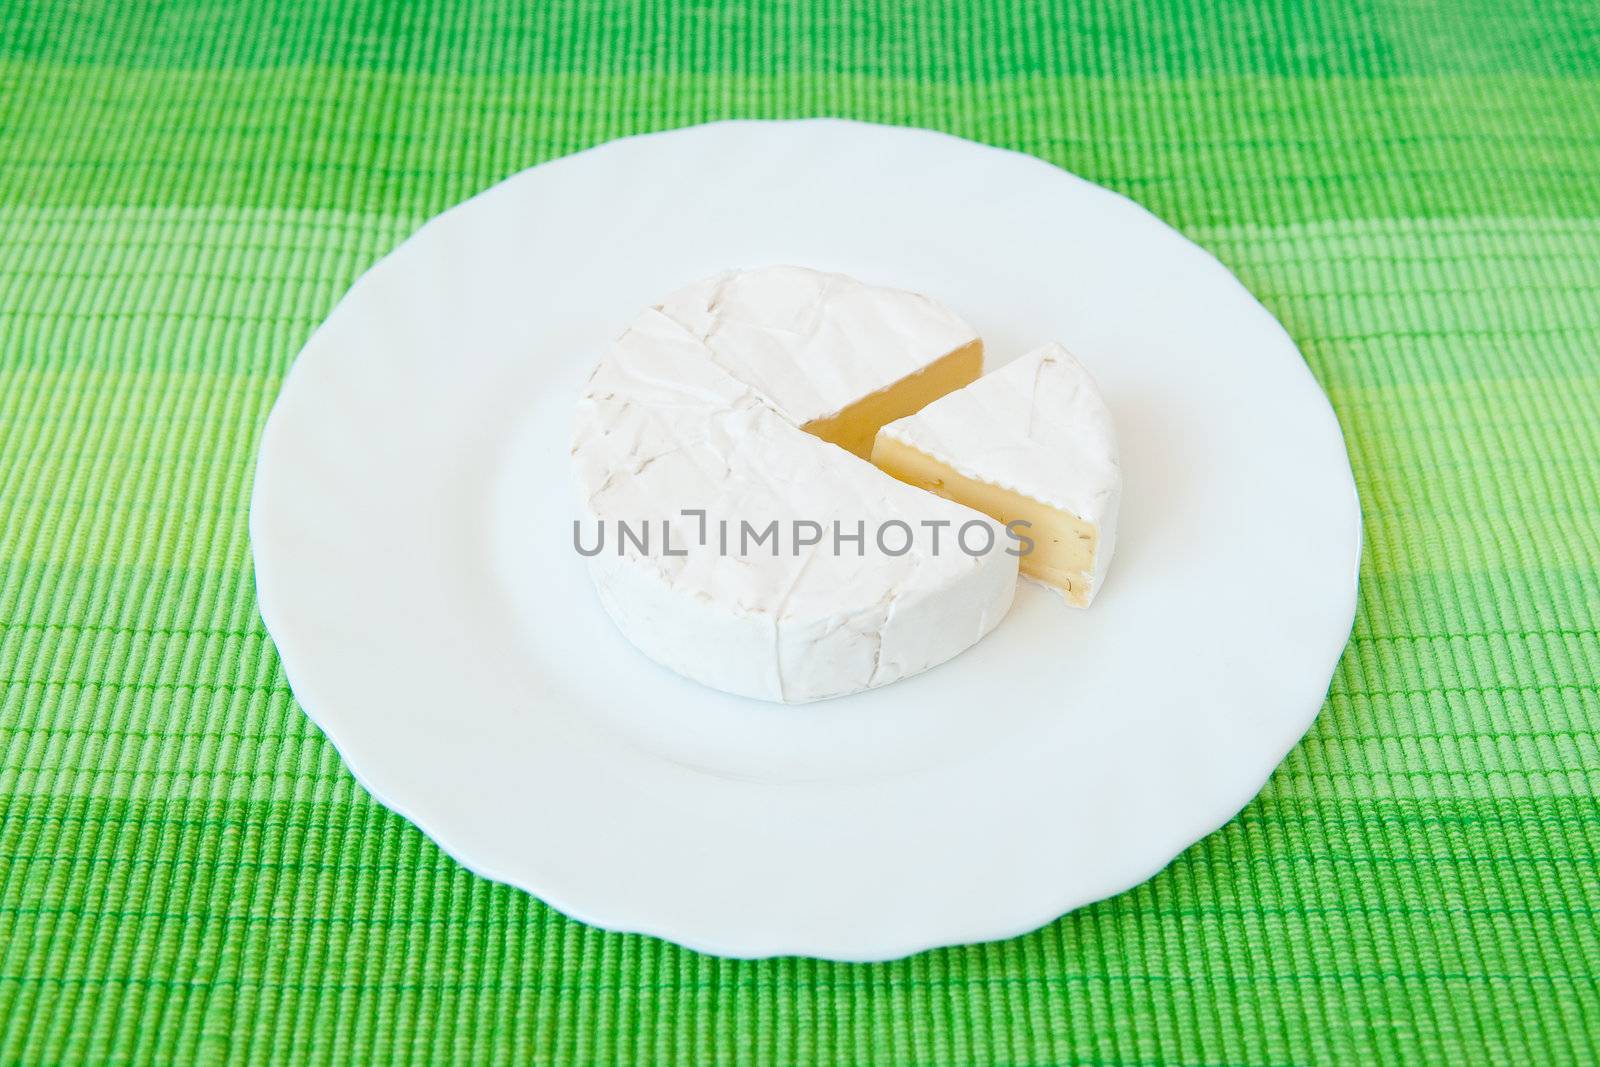 A blue cheese on the white plate